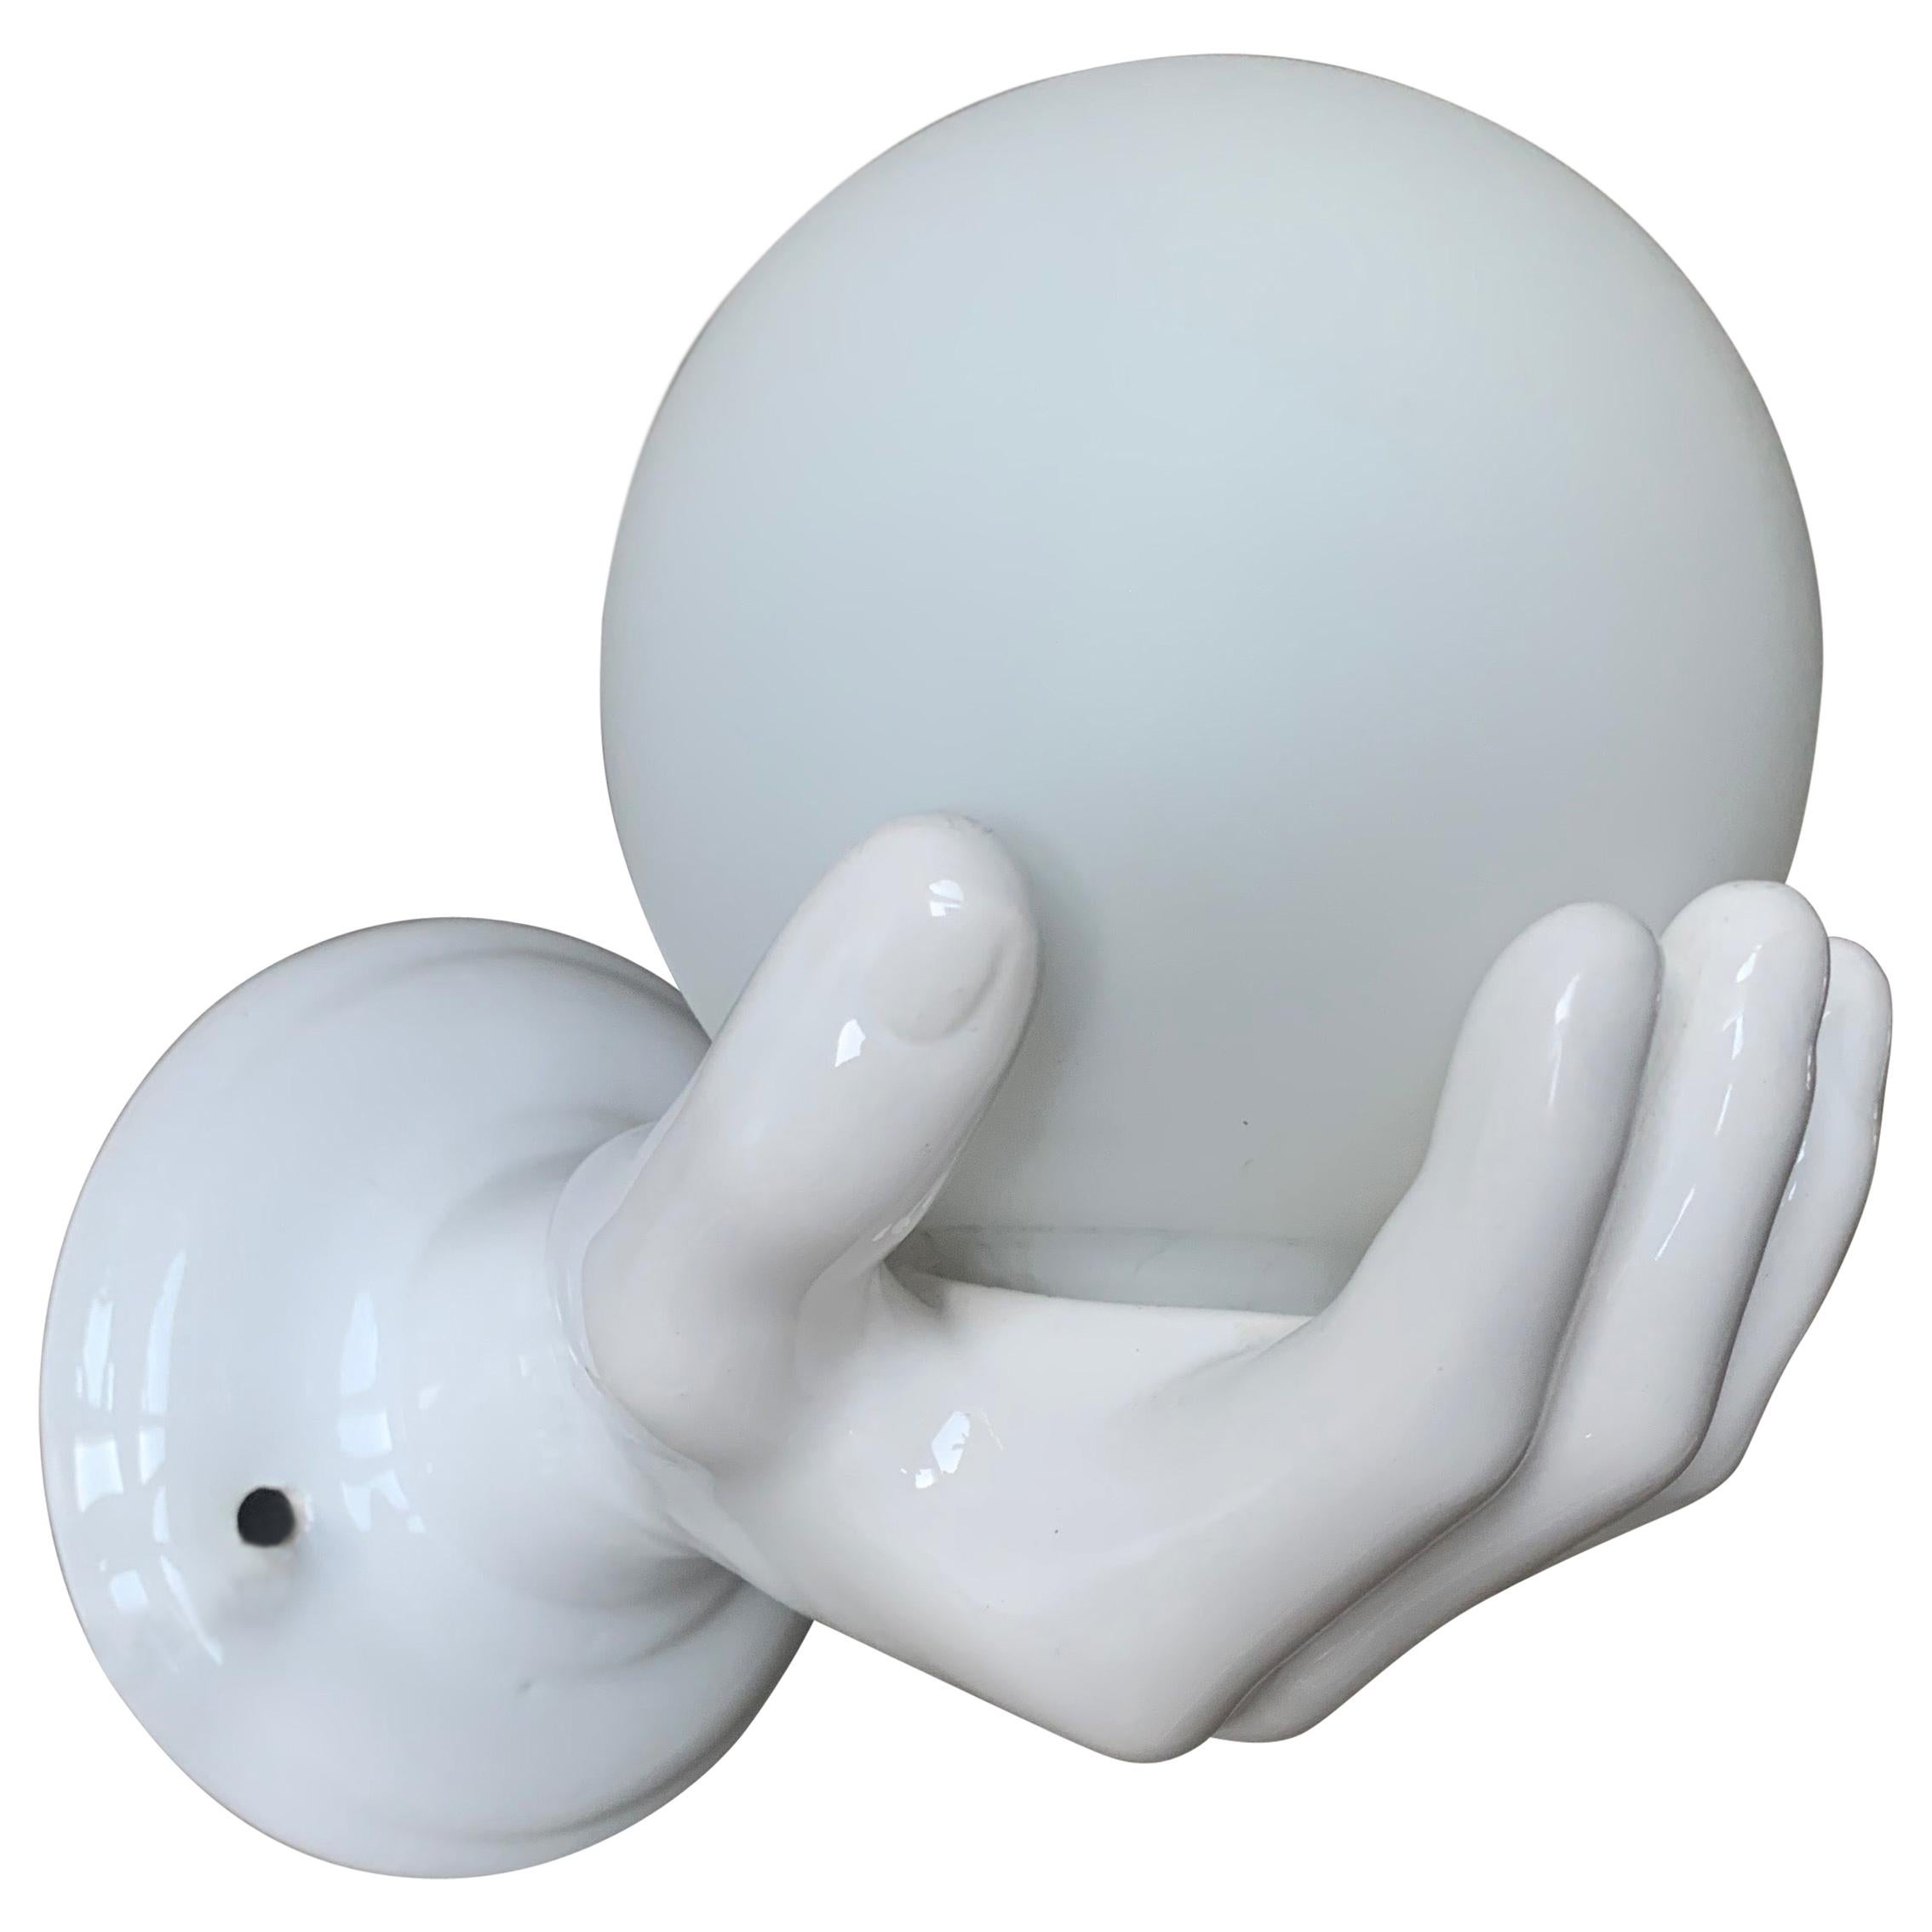 1970s Glazed White Ceramic Hand Holding a Glass Globe Wall Sconce or Wall Light